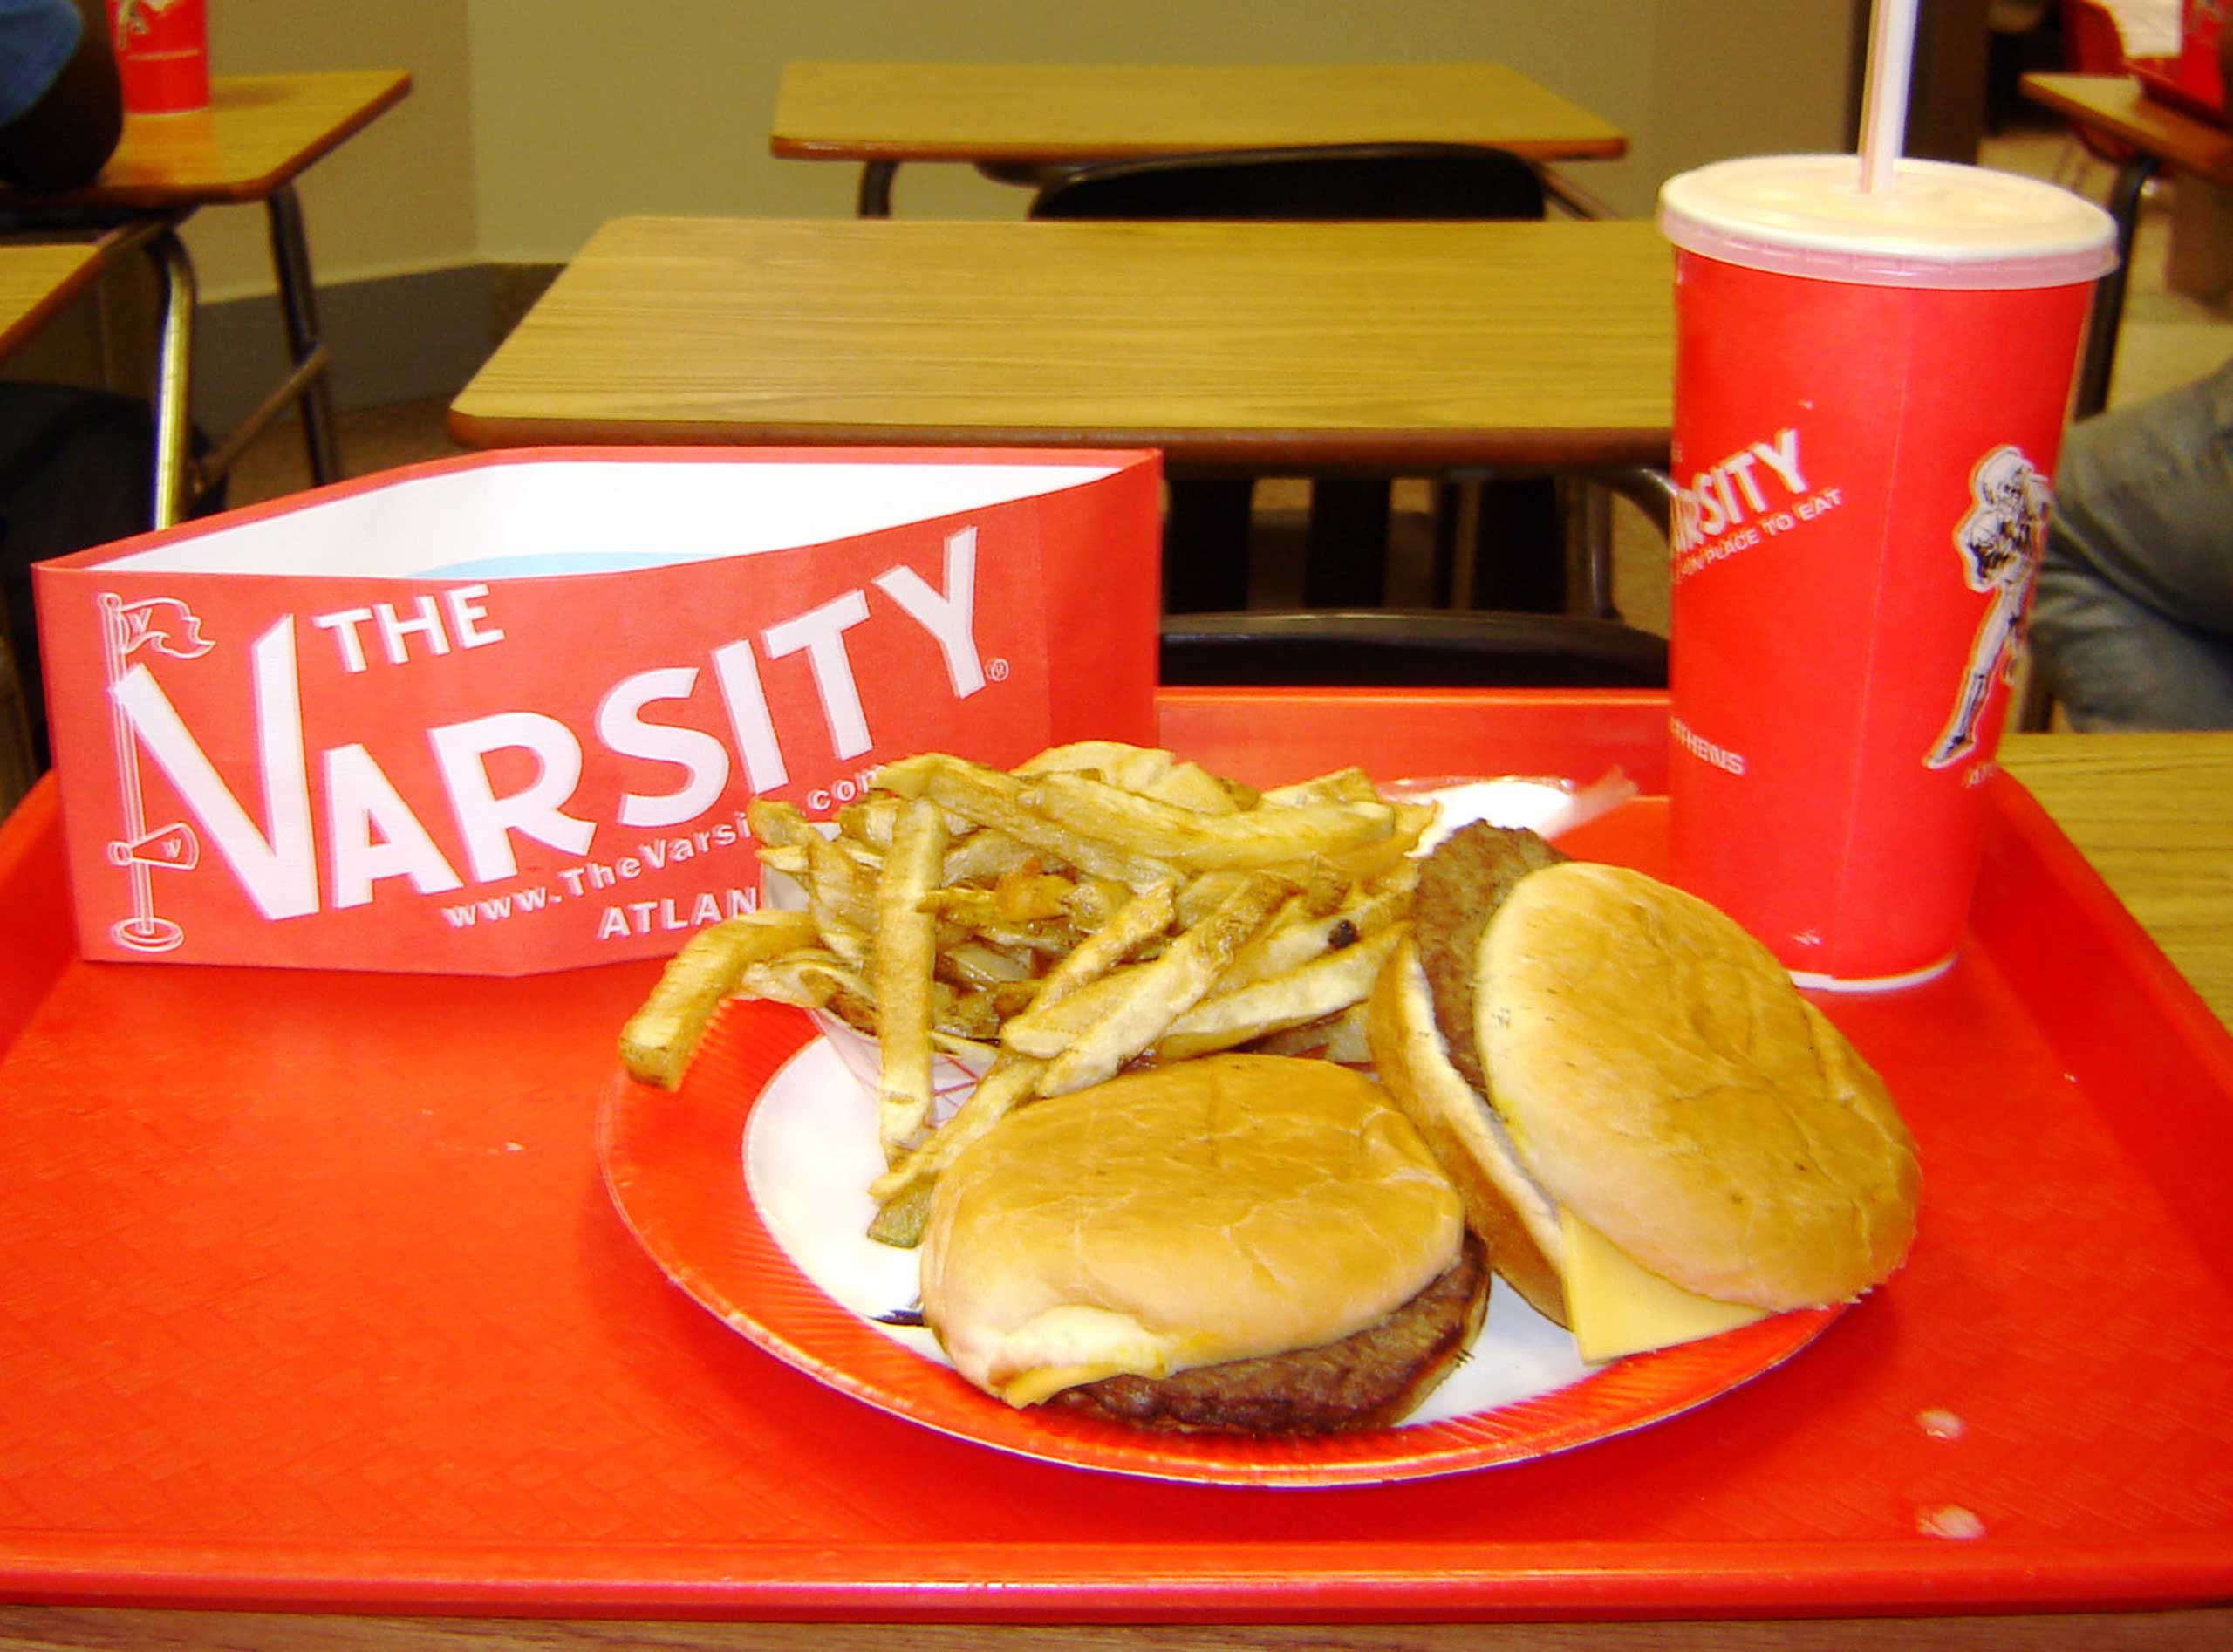 The ordering lingo for this Atlanta staple, which debuted in 1928, is almost as delicious as the burger itself: you get it “all the way” in lieu of “with onions,” and “walk a steak” replaces “to-go.” These branding gimmicks were later replicated by burger chains like In-N-Out, whose secret menu (see: “animal style” and  protein style ) has helped lure millions of customers.